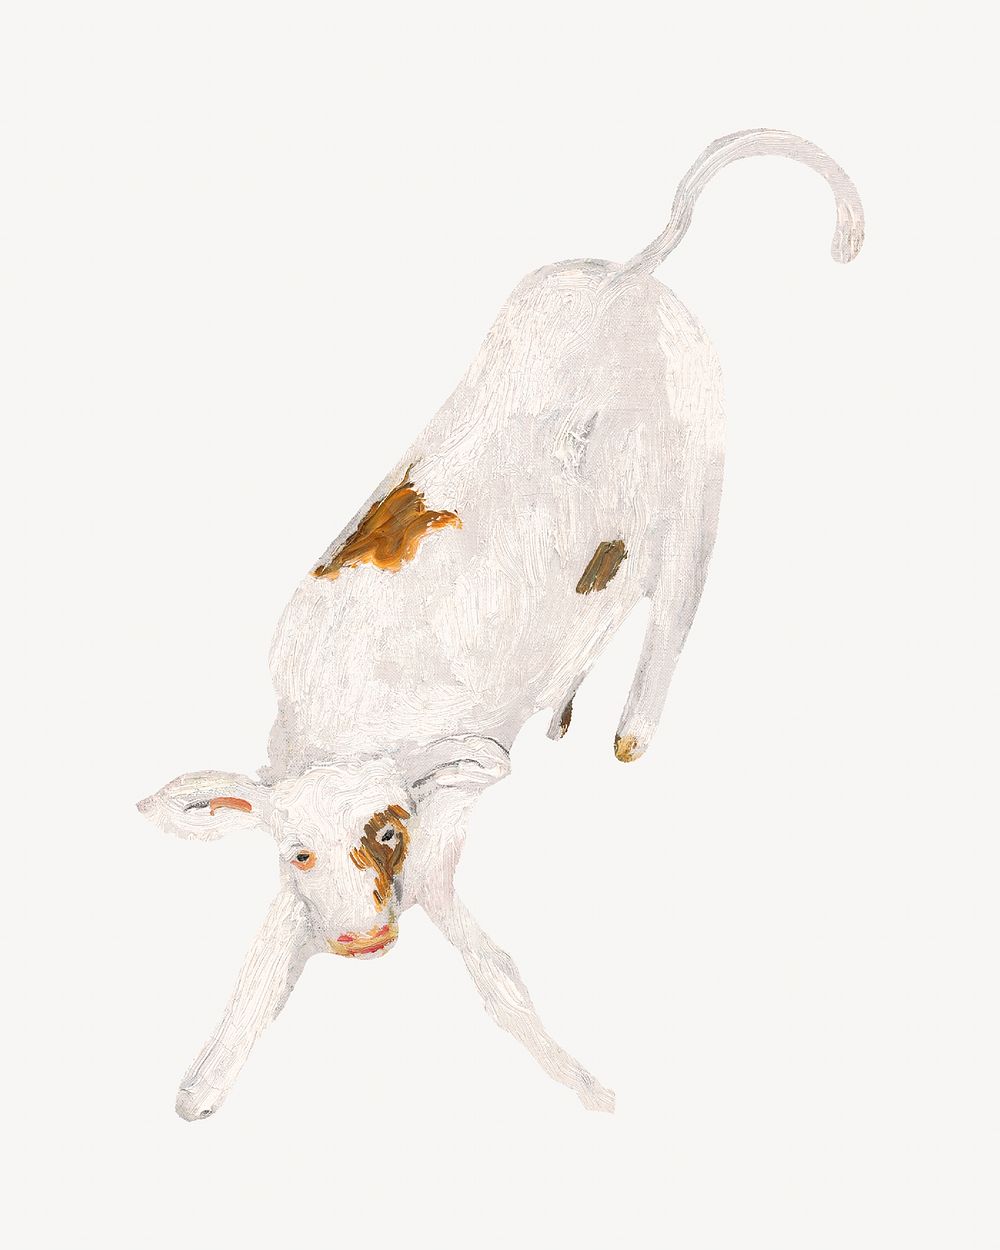 Calf baby cow, animal illustration by Cyprian Majernik. Remixed by rawpixel.